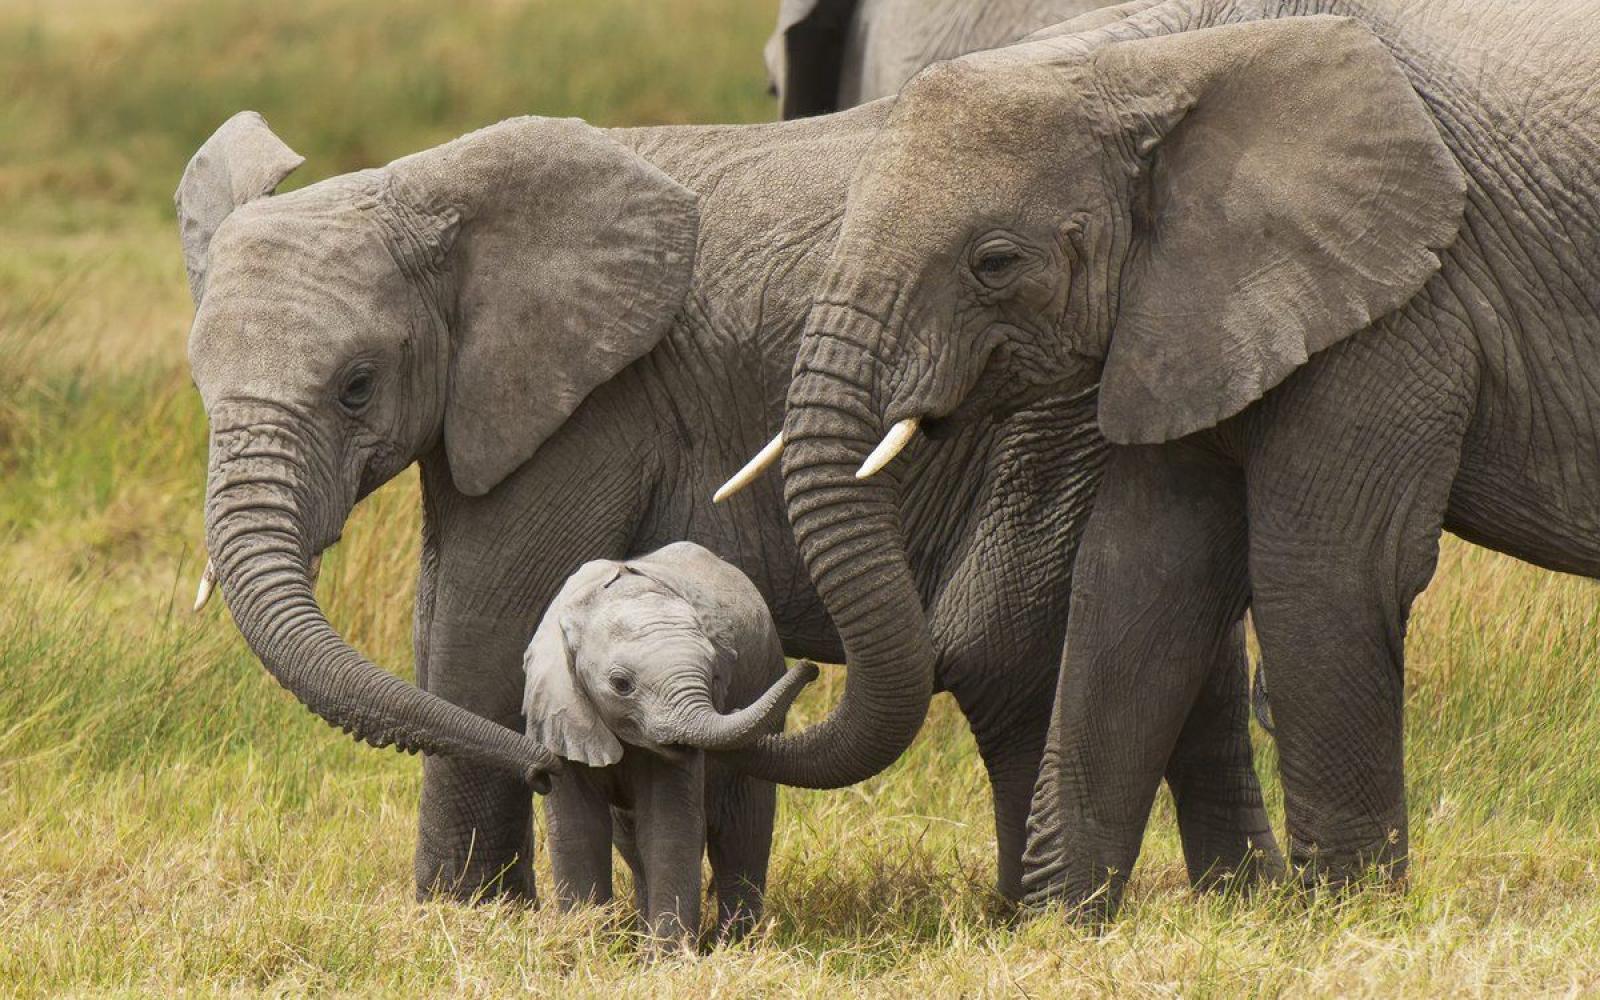 Adult African elephants with baby